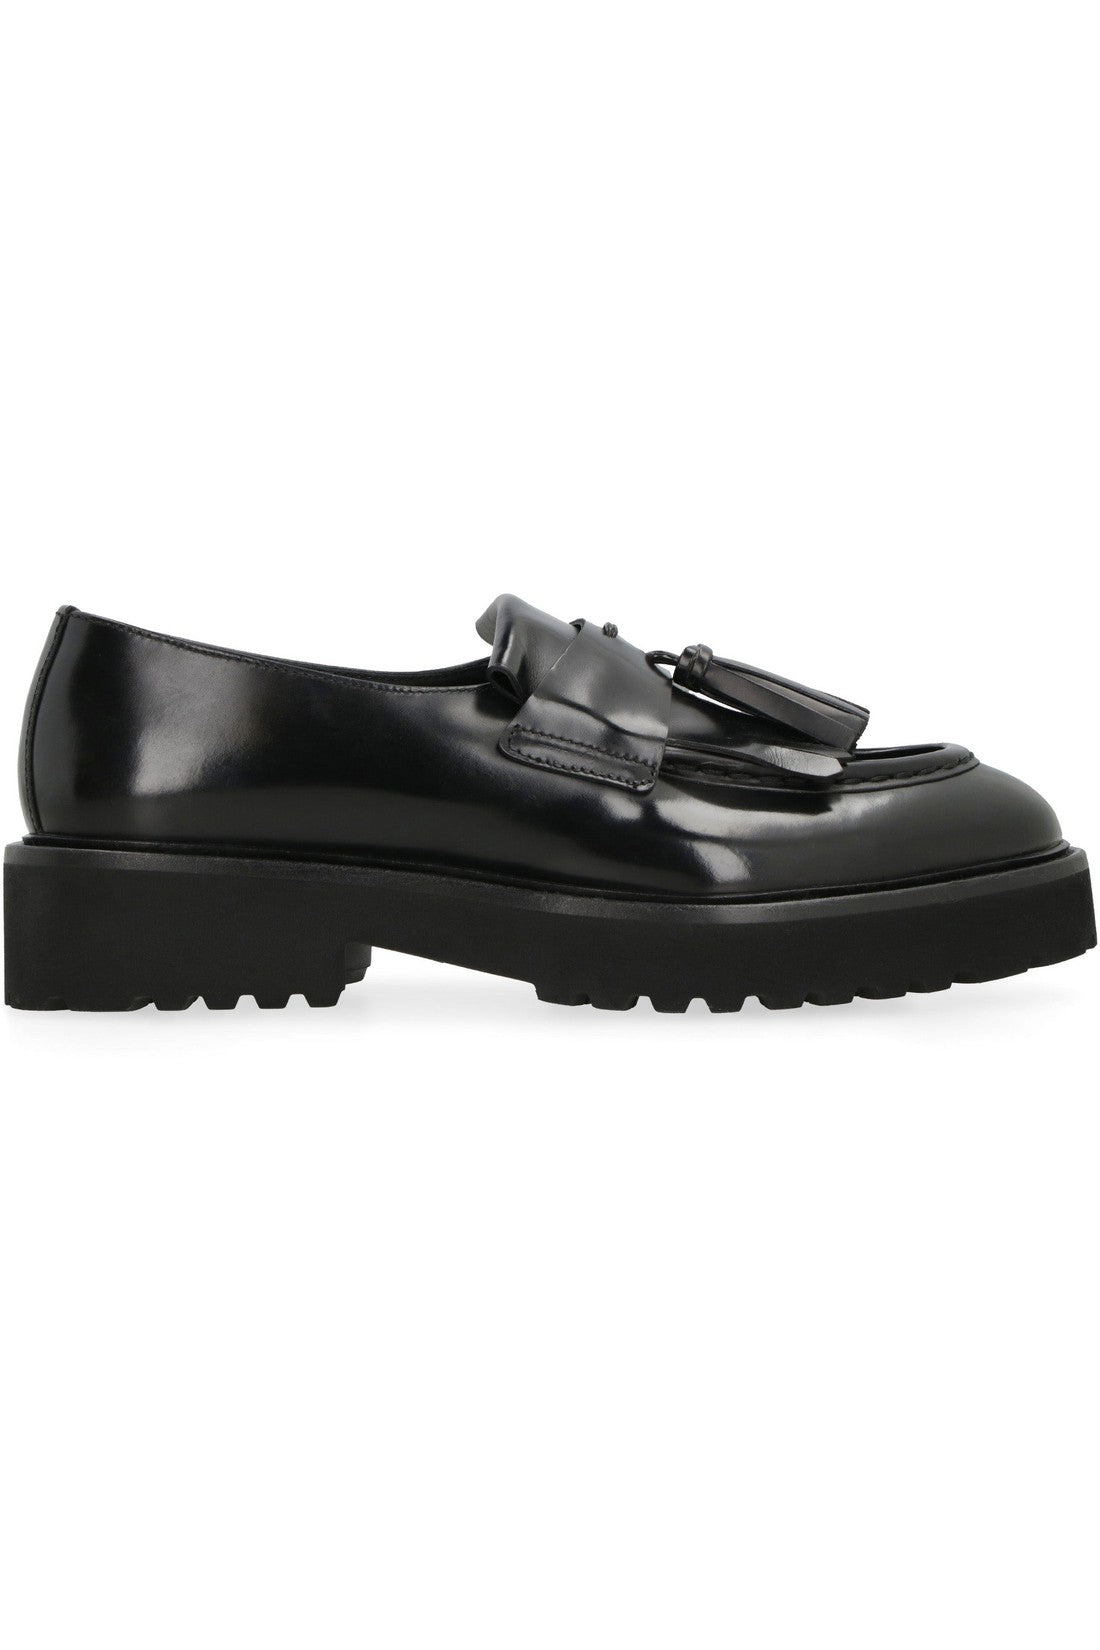 Doucal's-OUTLET-SALE-Leather loafers-ARCHIVIST